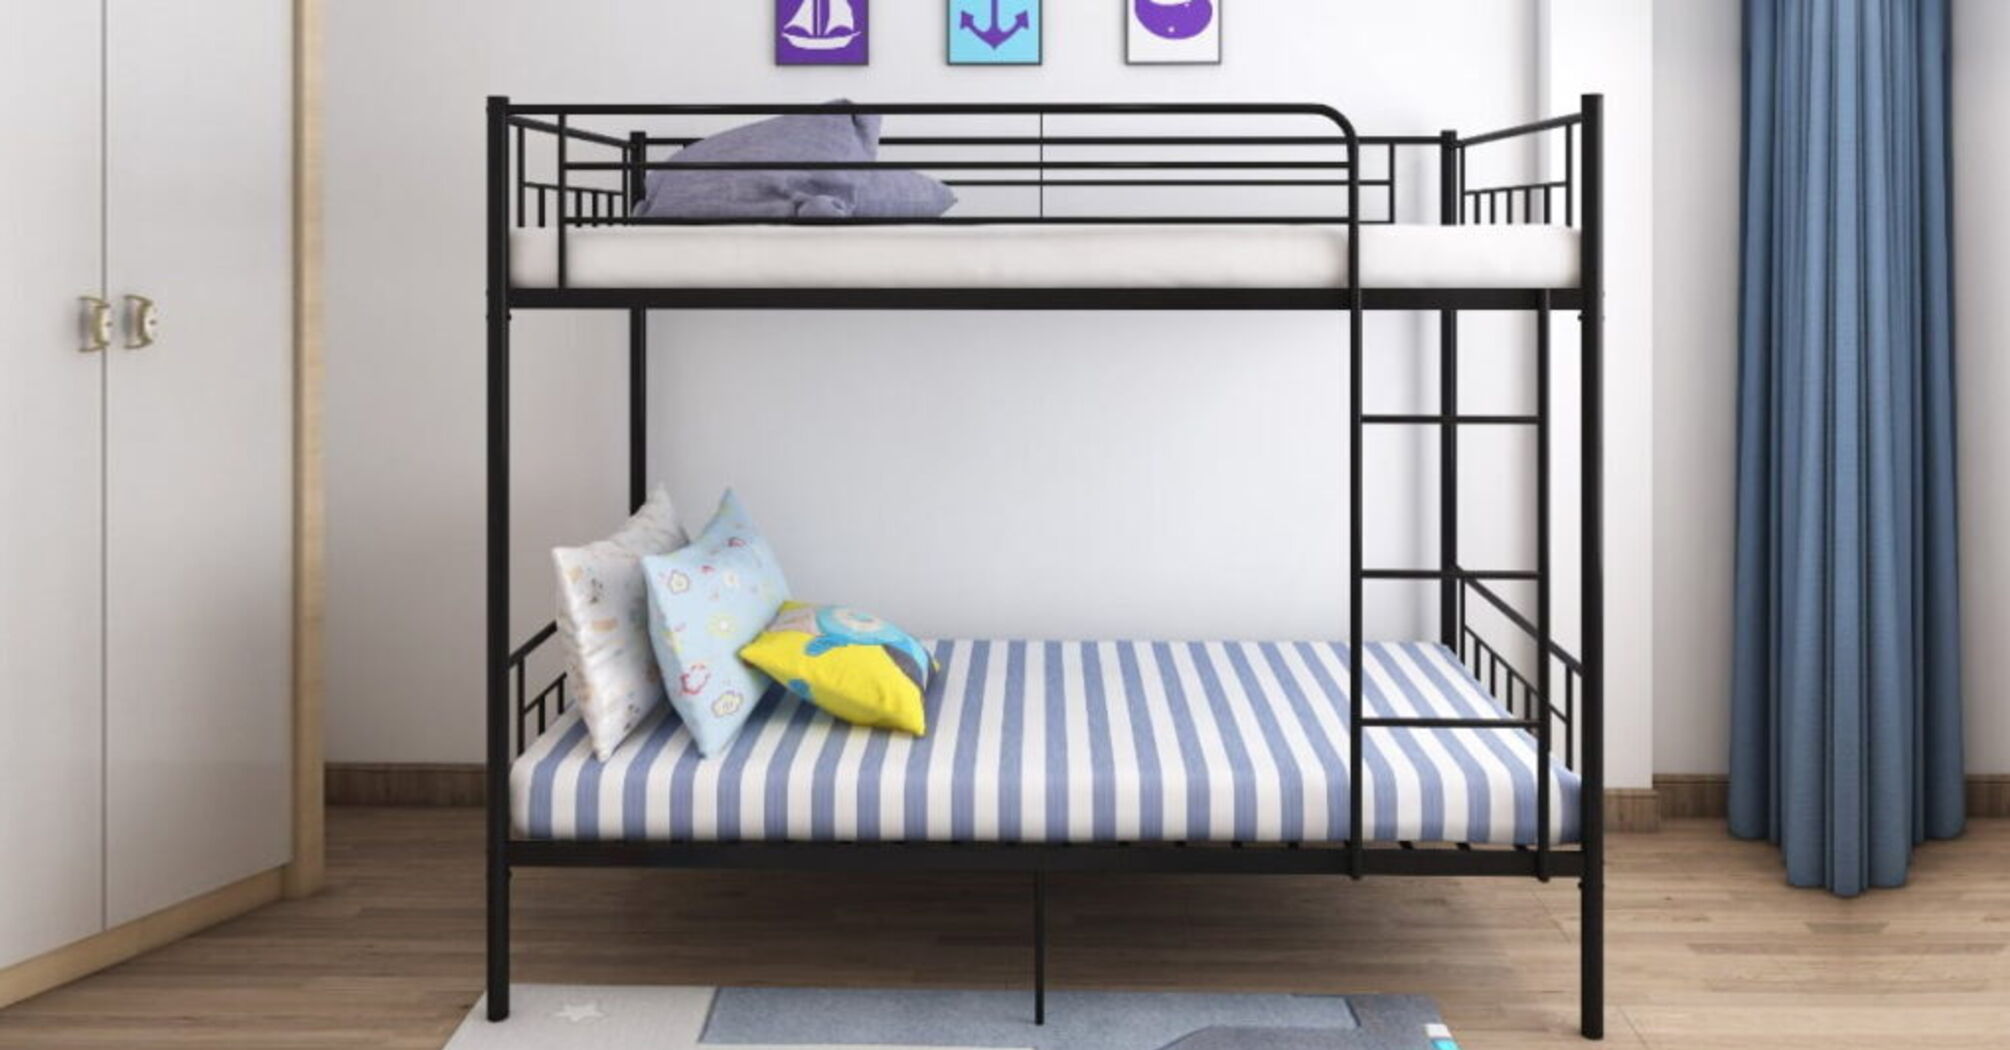 Advantages and disadvantages of a bunk bed